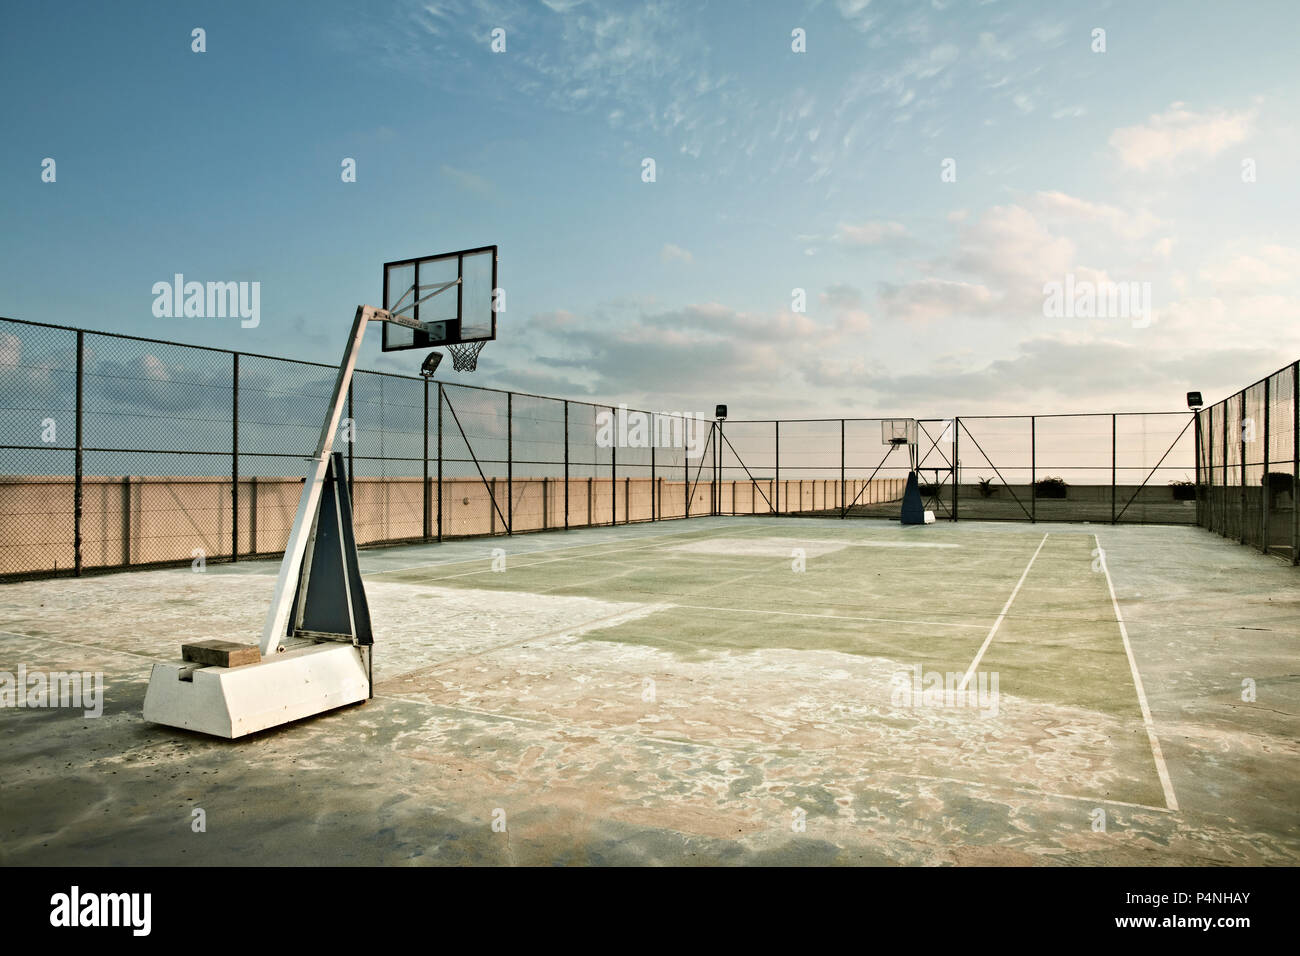 Transparent basketball board in the open air at twilight Stock Photo